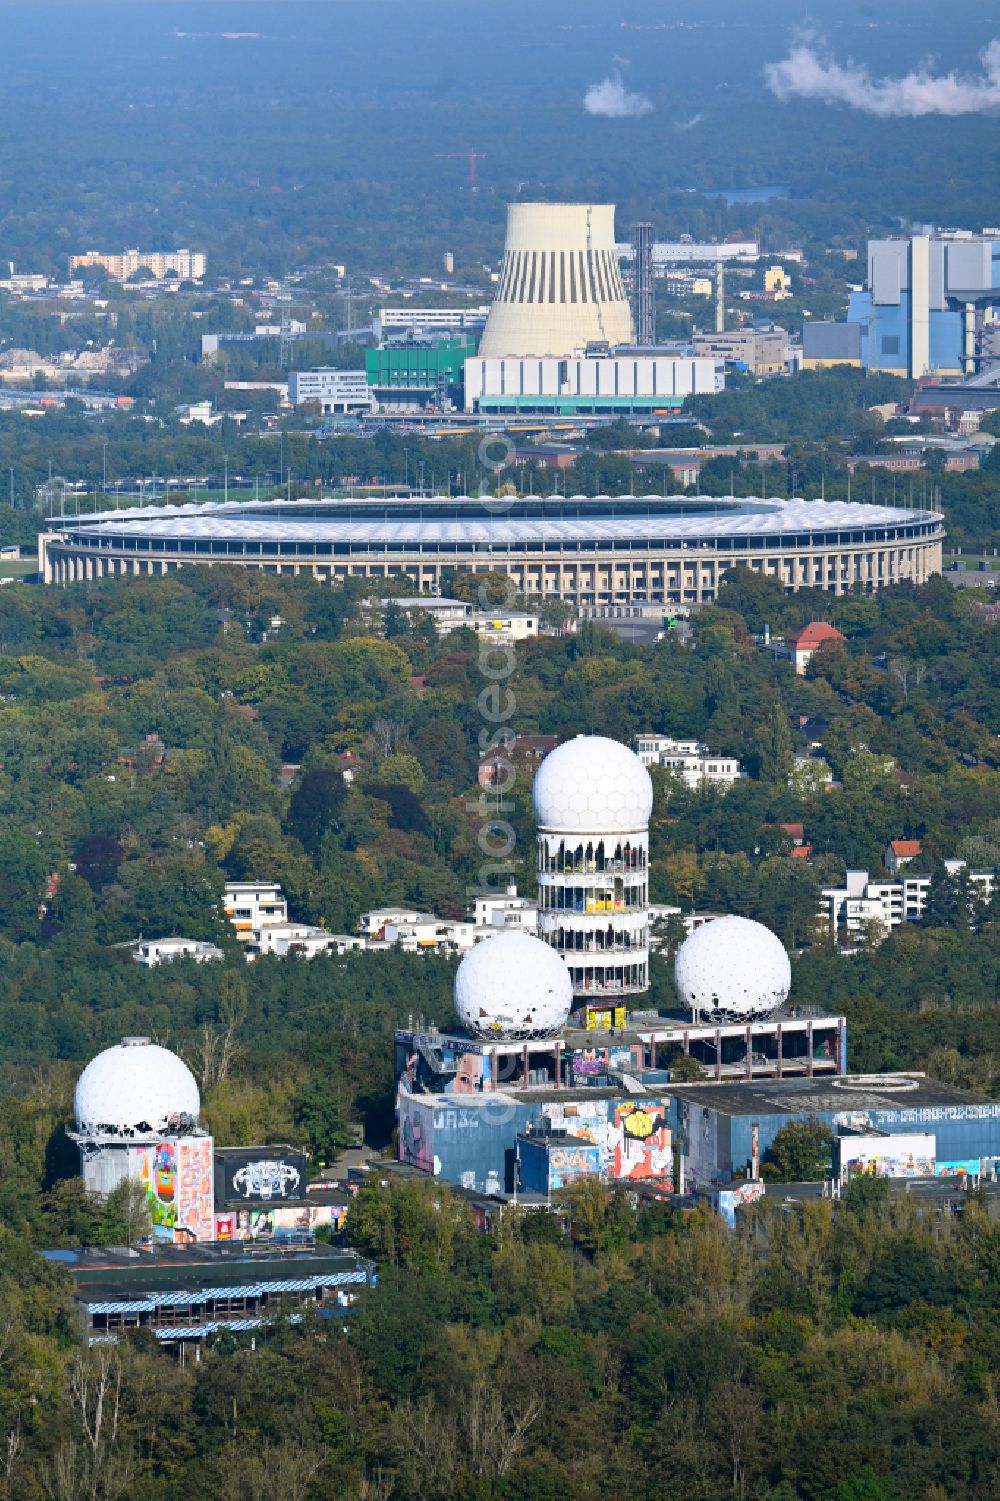 Aerial image Berlin - Ruins of the former American military interception and radar system on the Teufelsberg in Berlin - Charlottenburg